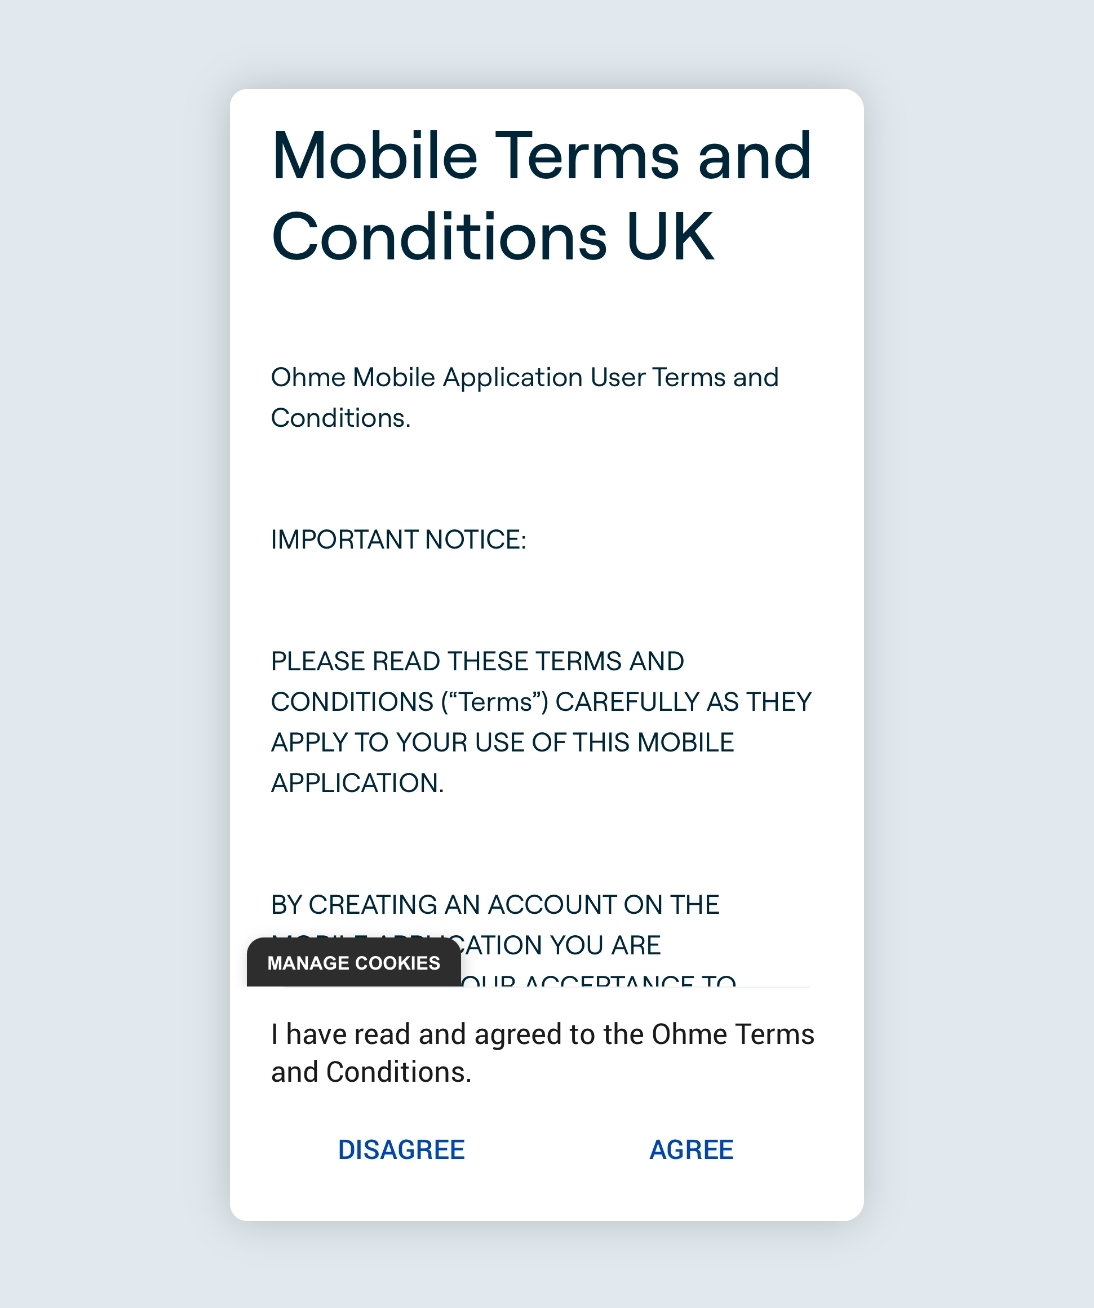 Mobile terms and conditions page with options to agree or disagree.